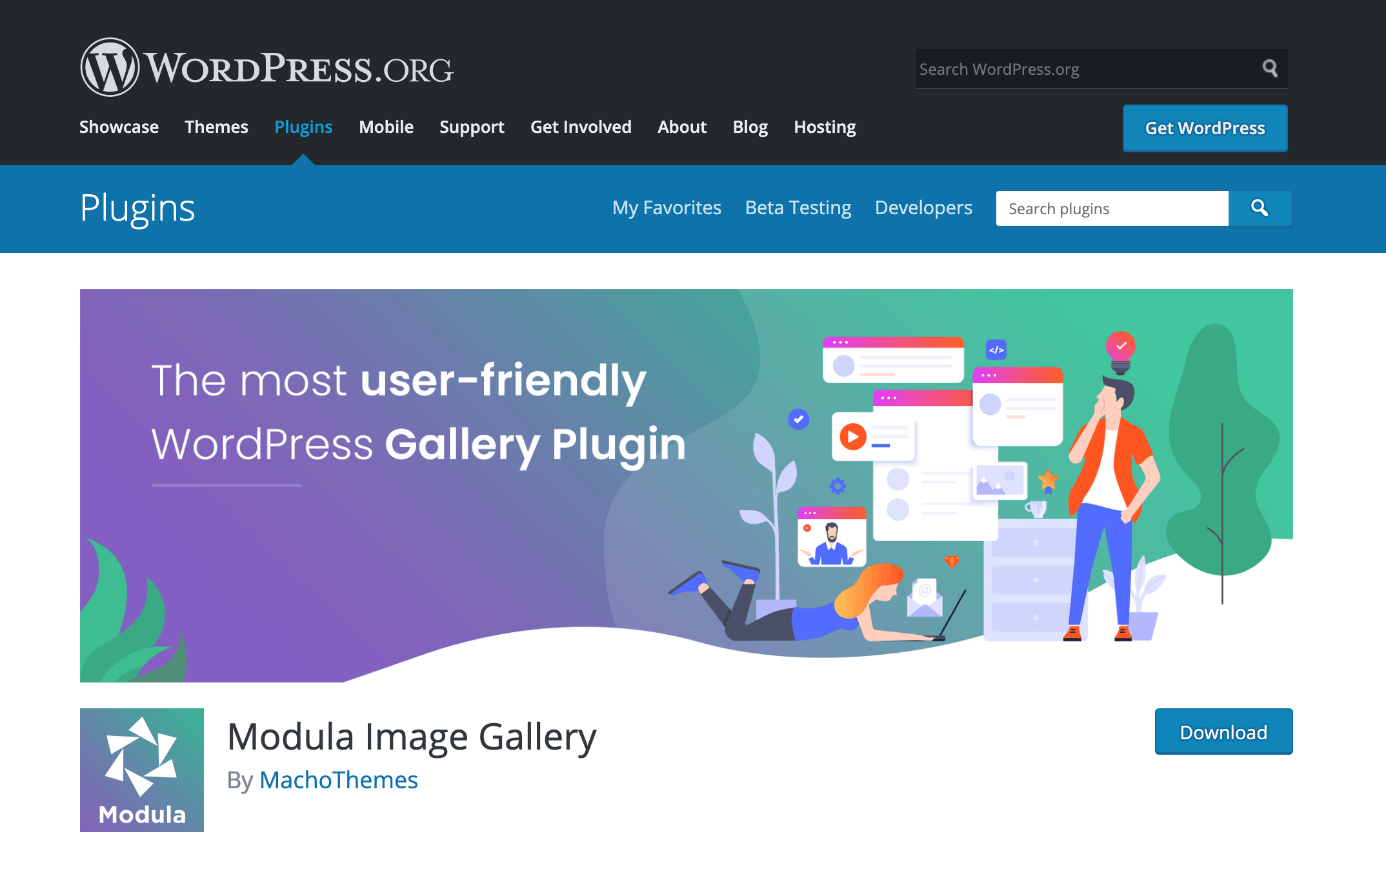 The Modula photo gallery for WordPress is available for download at wordpress.org